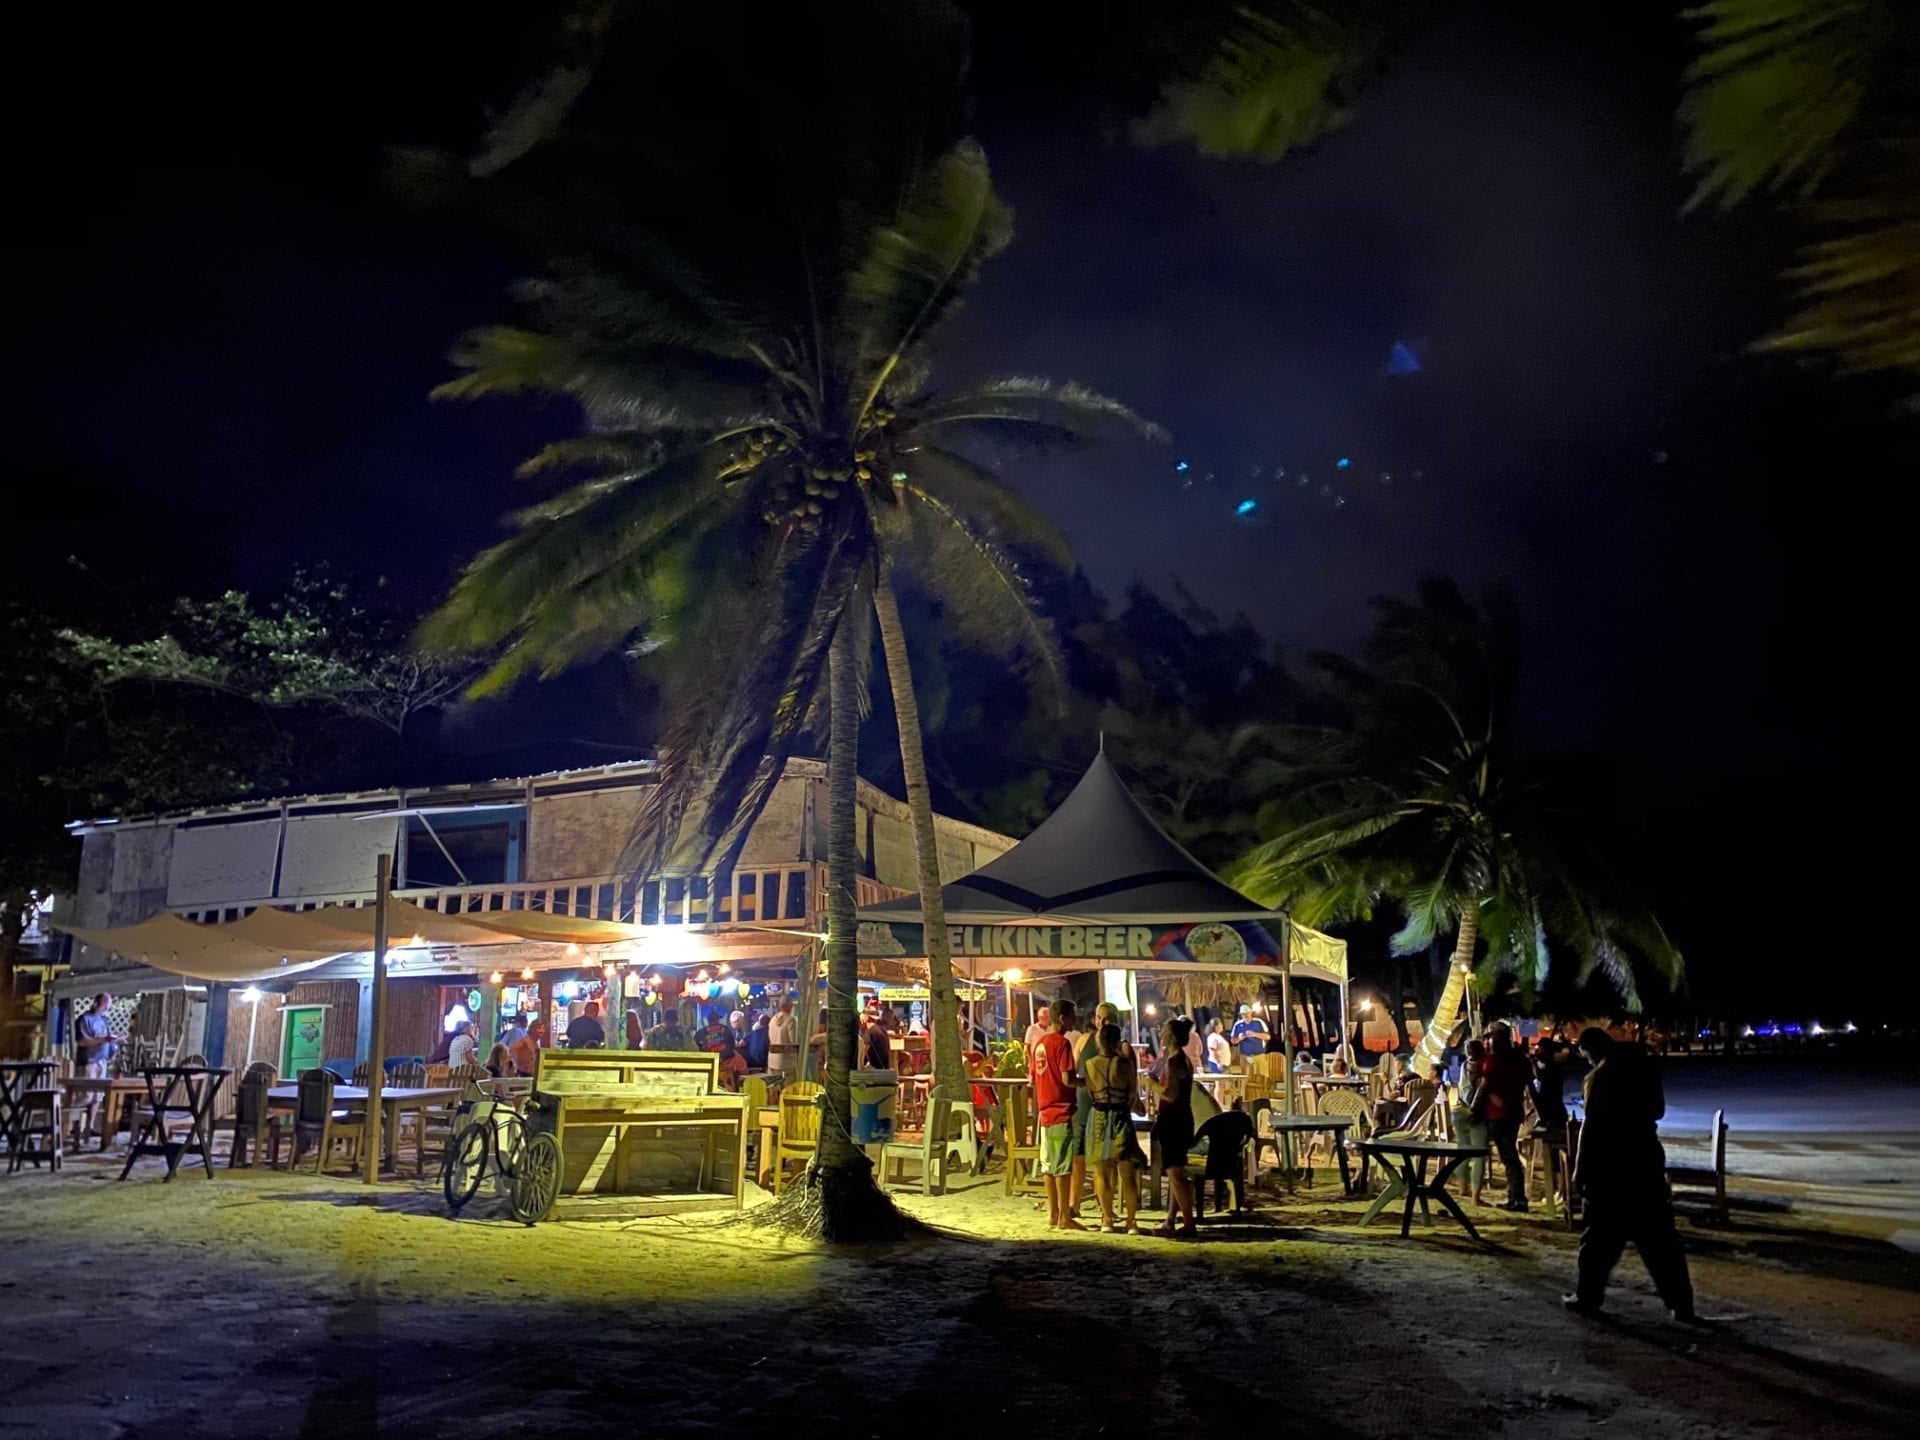 On the end of our trip we spent another night in Caye Caulker and enjoyed the nightlife there as well as a little diy fishing from the dock